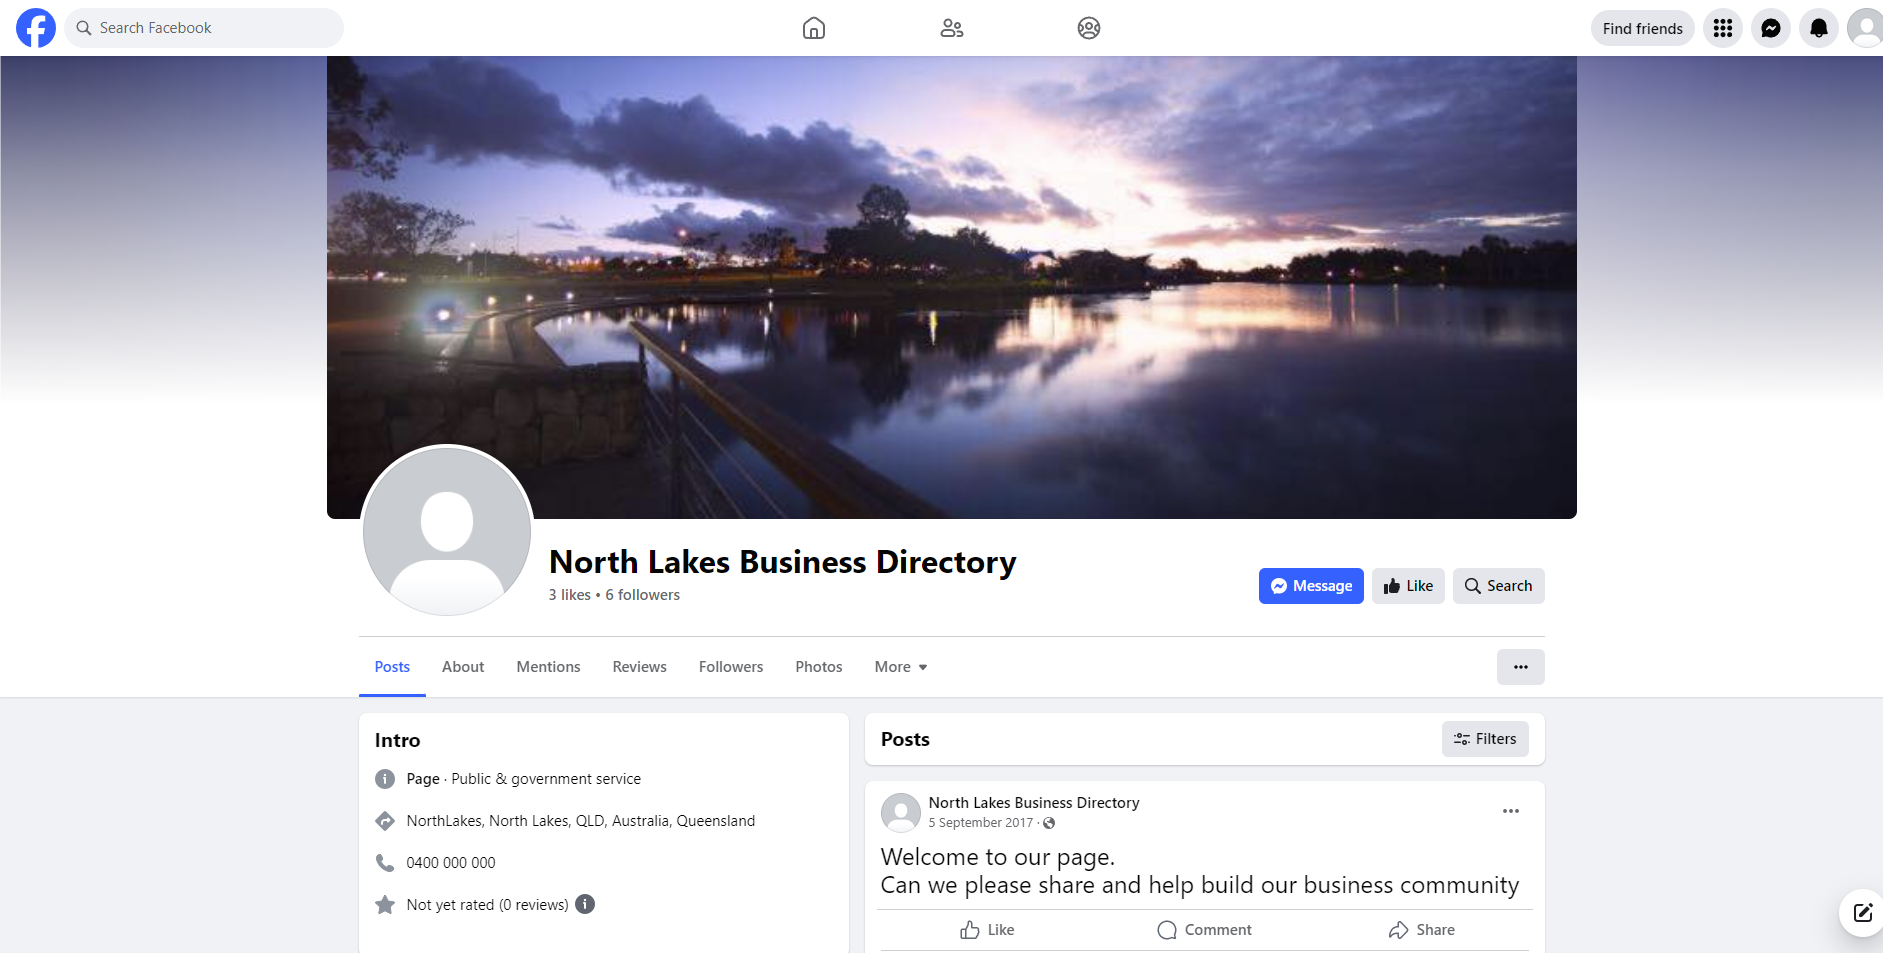 North Lakes Business Directory